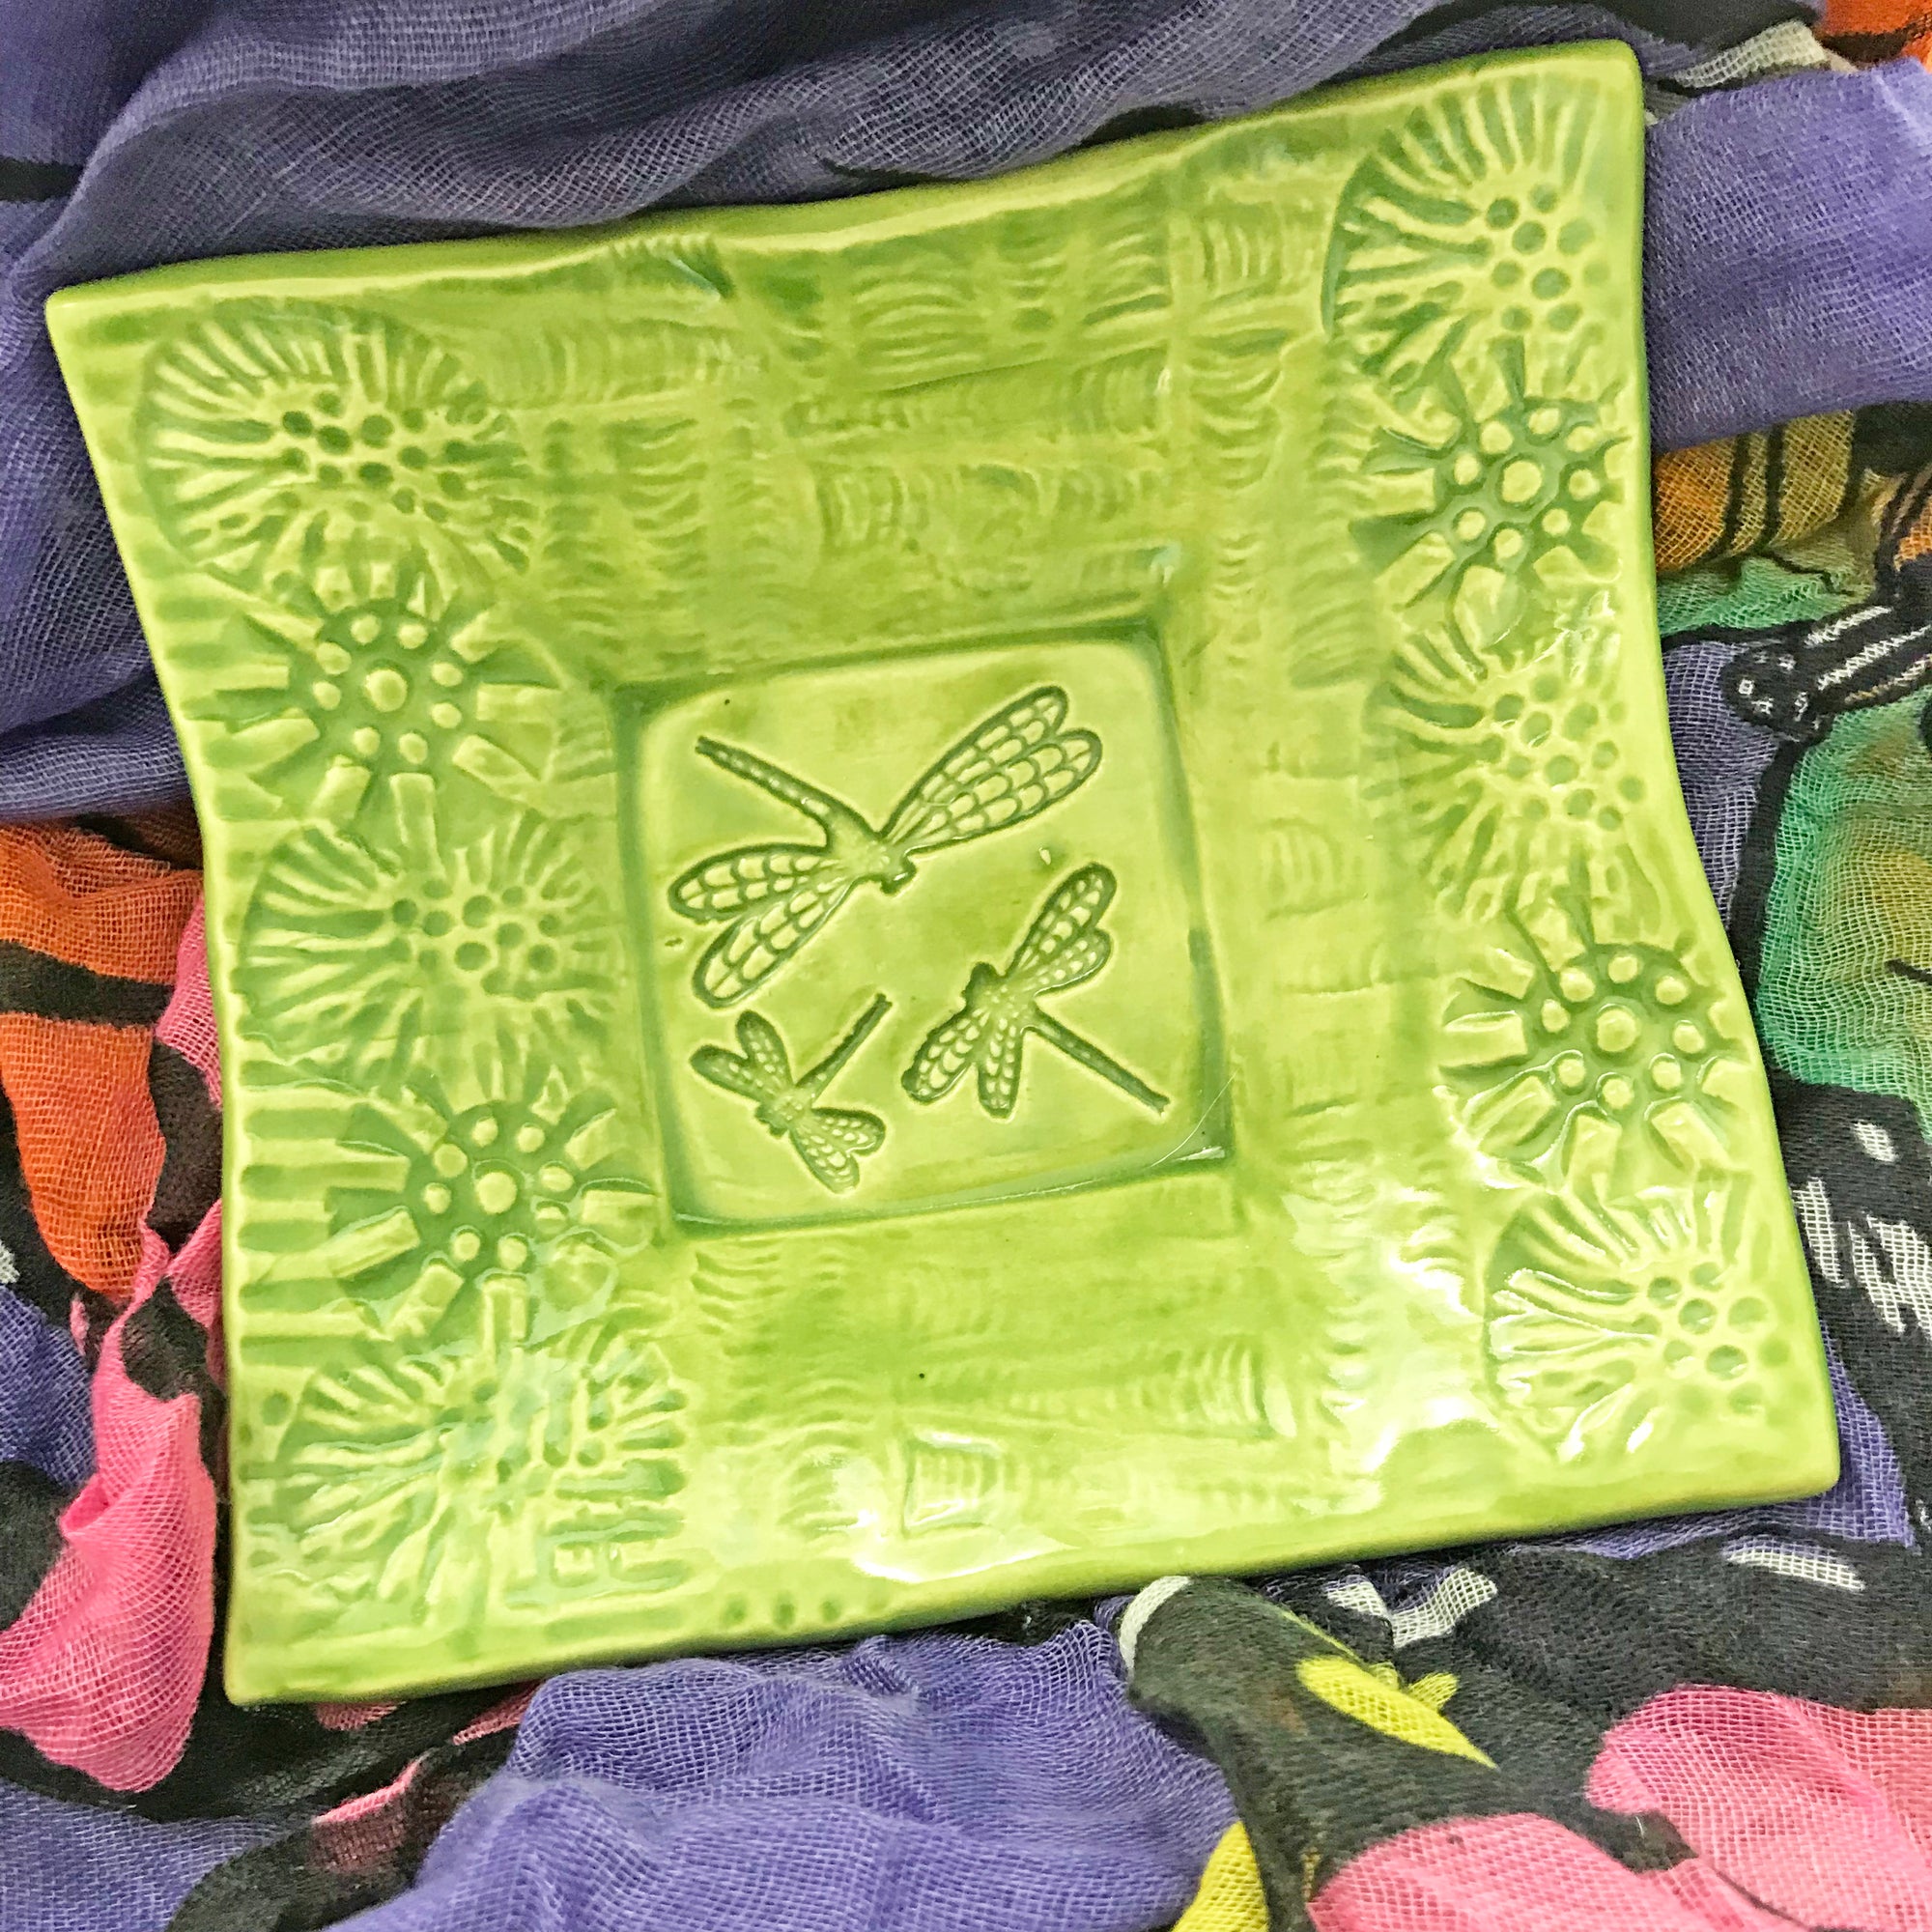 Handmade pottery dish with dragonfly design highlighted by the bright lime glaze.